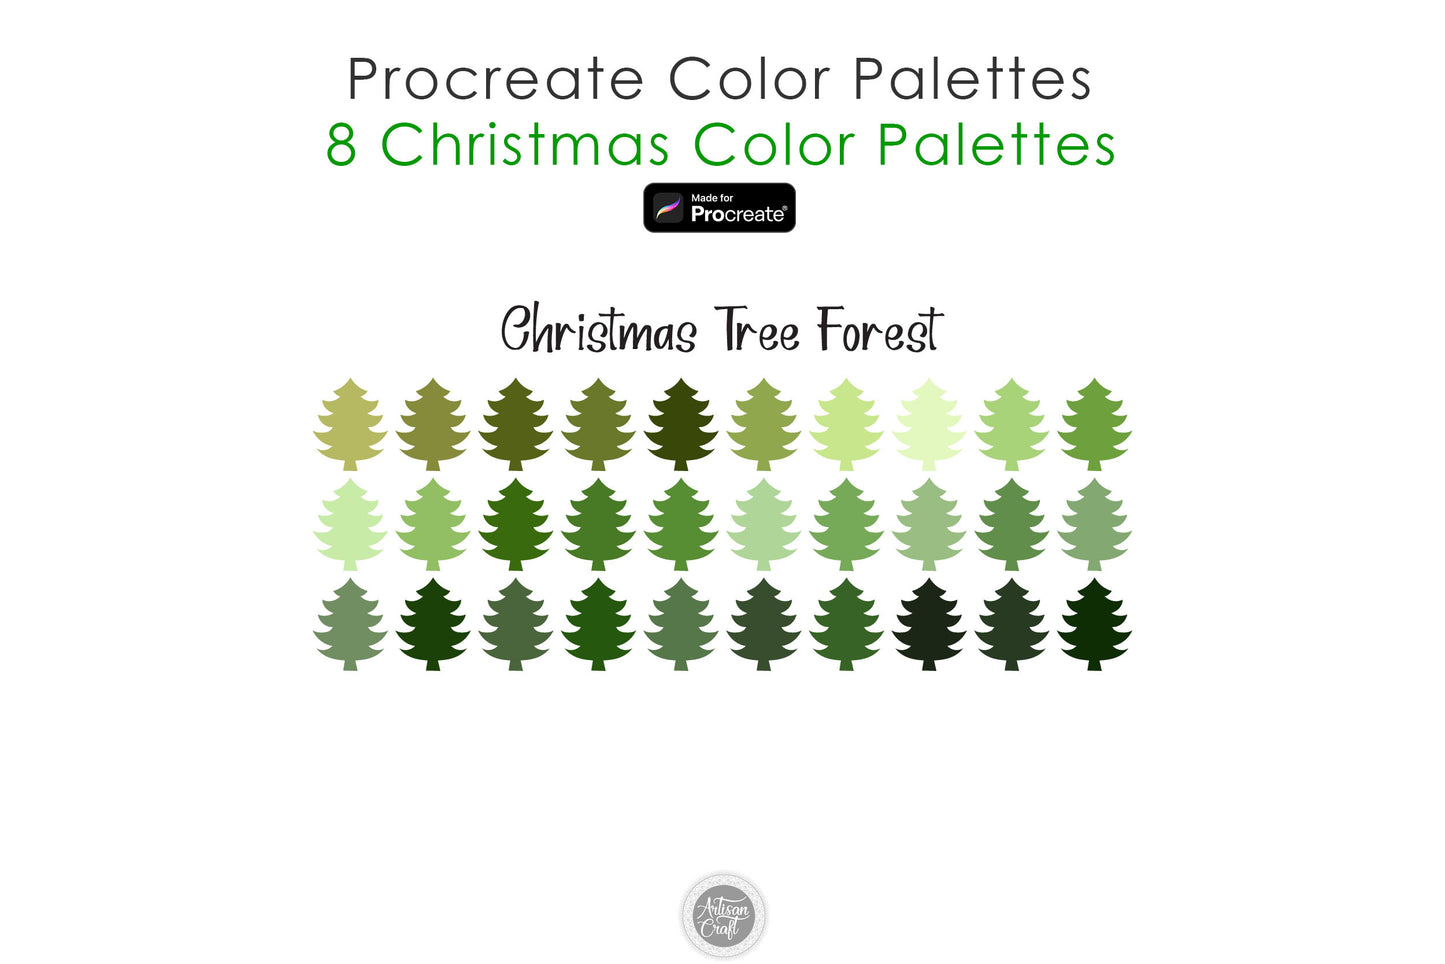 Procreate color palette for Christmas